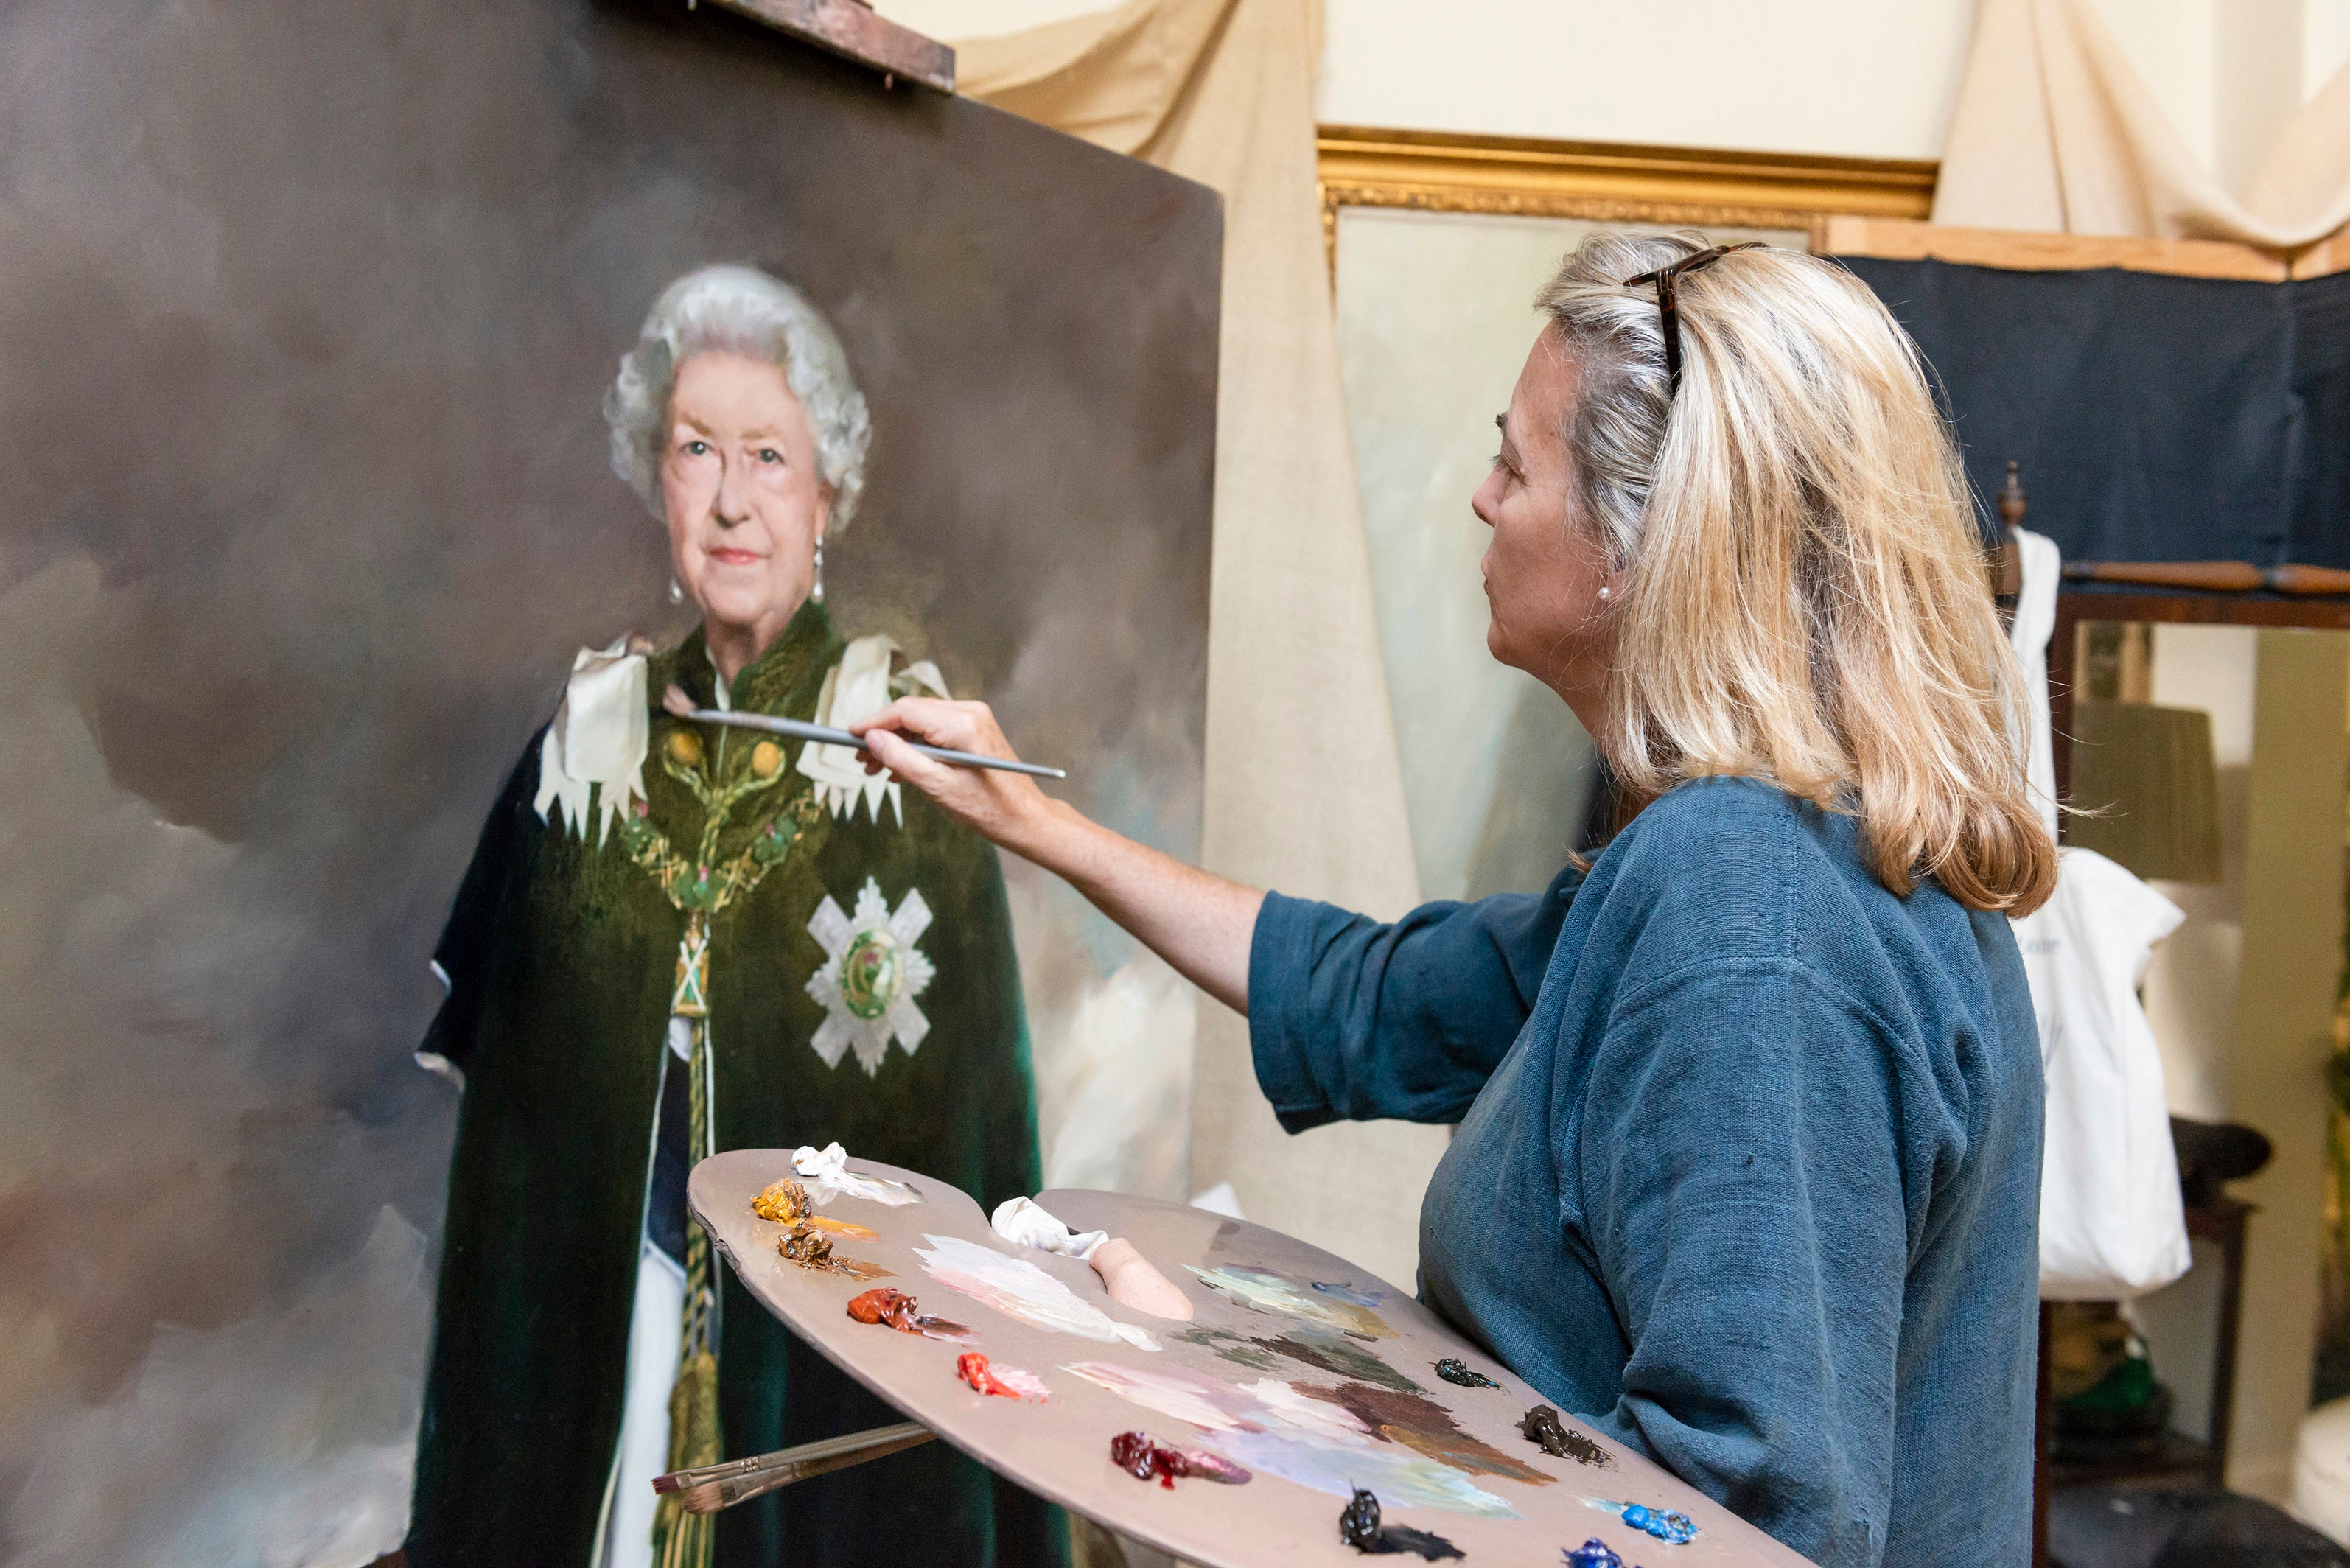 Artist Nicky Philipps at work in her studio painting a portrait of Queen Elizabeth II (Royal Collection Trust/Her Majesty Queen Elizabeth II)